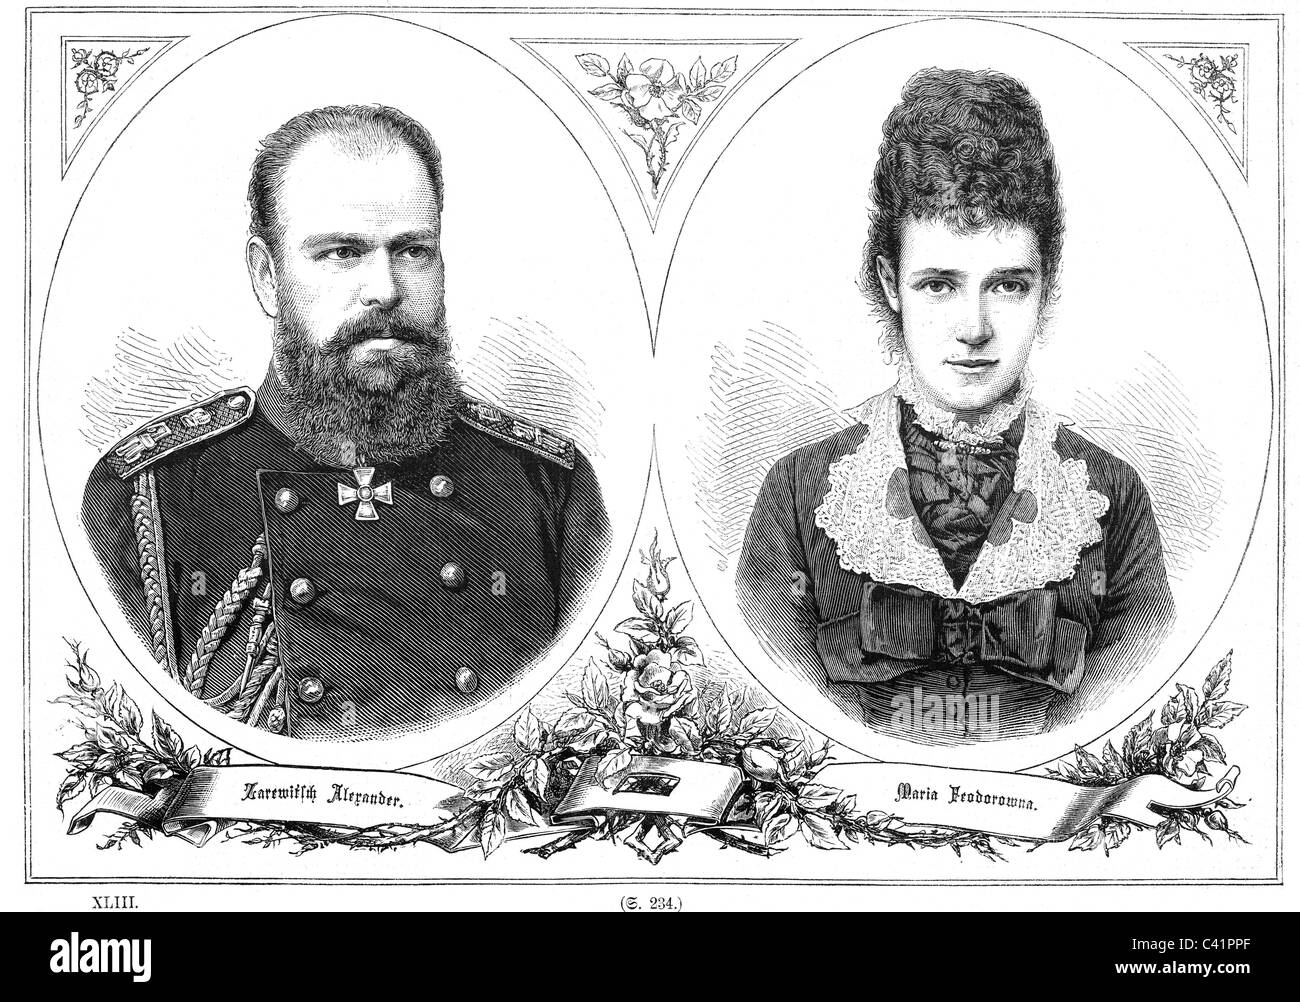 Alexander III Alexandrovich, 10.3.1845 - 1.11.1894, Emperor of Russia 1881 - 1894, portrait, with his wife Maria Feodorovna (Dagmar of Denmark), wood engraving, late 19th century, Stock Photo